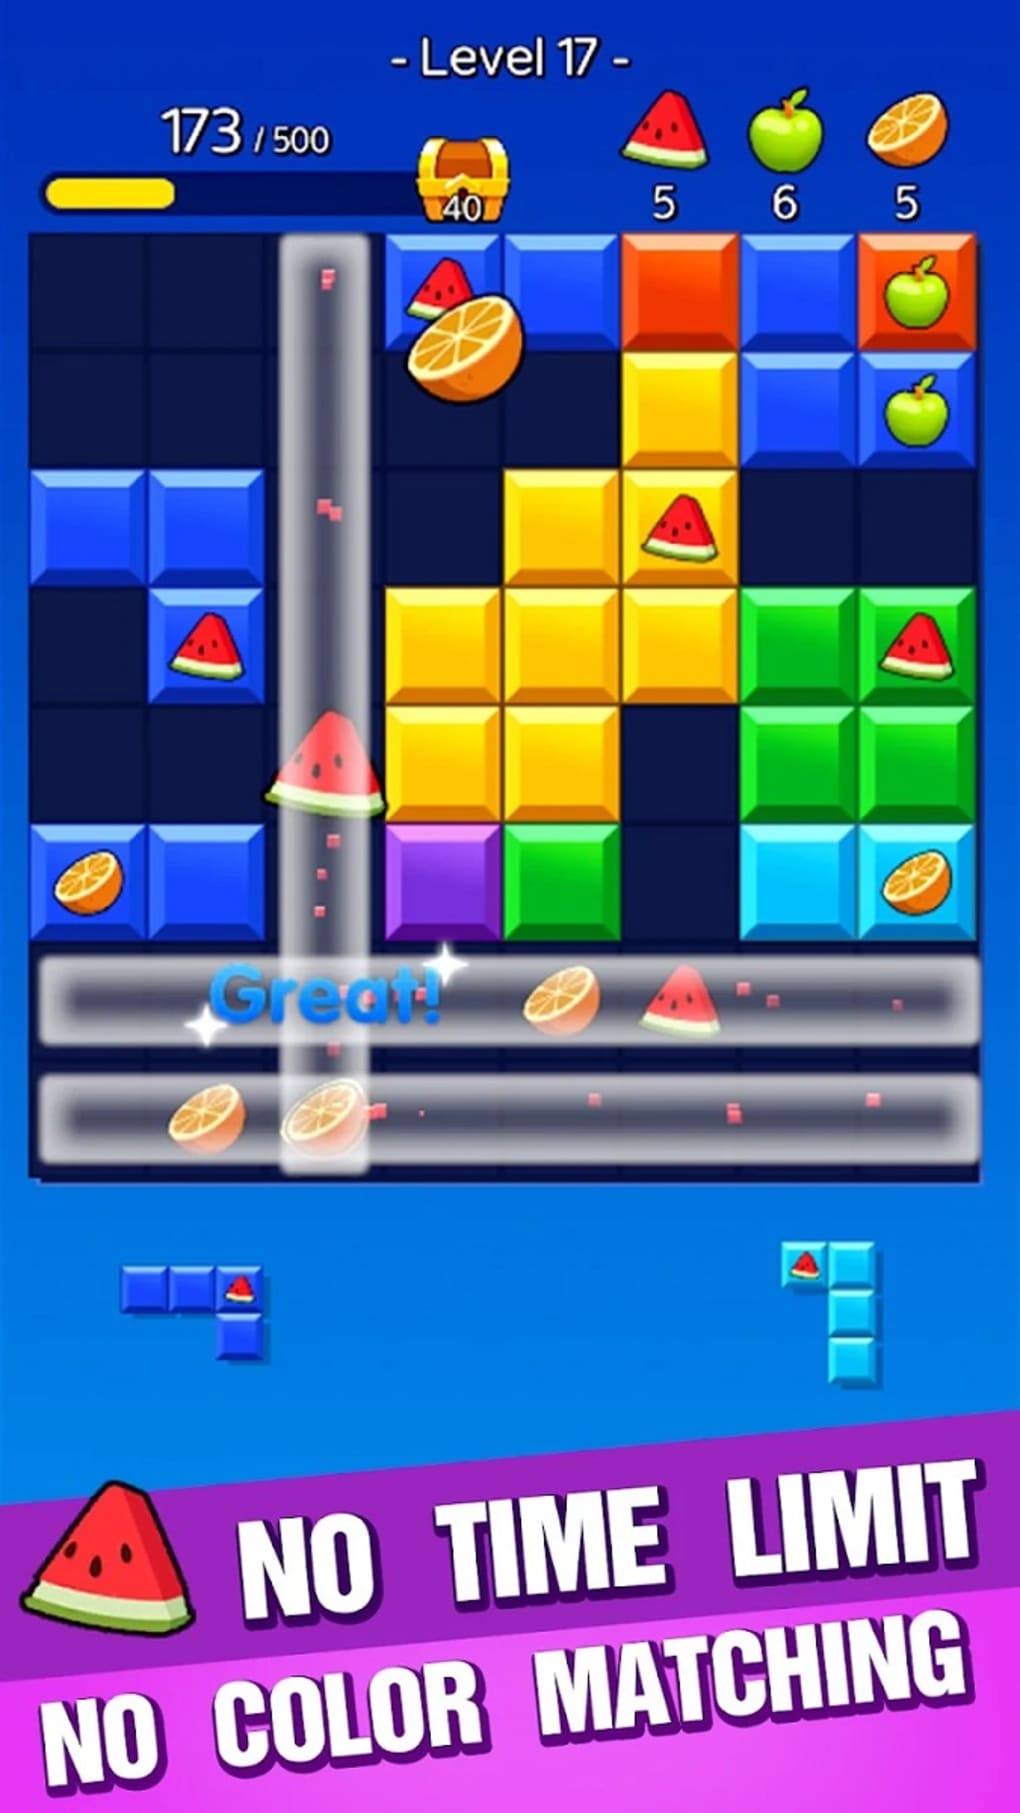 How to Download Lucky Block Classic for Android